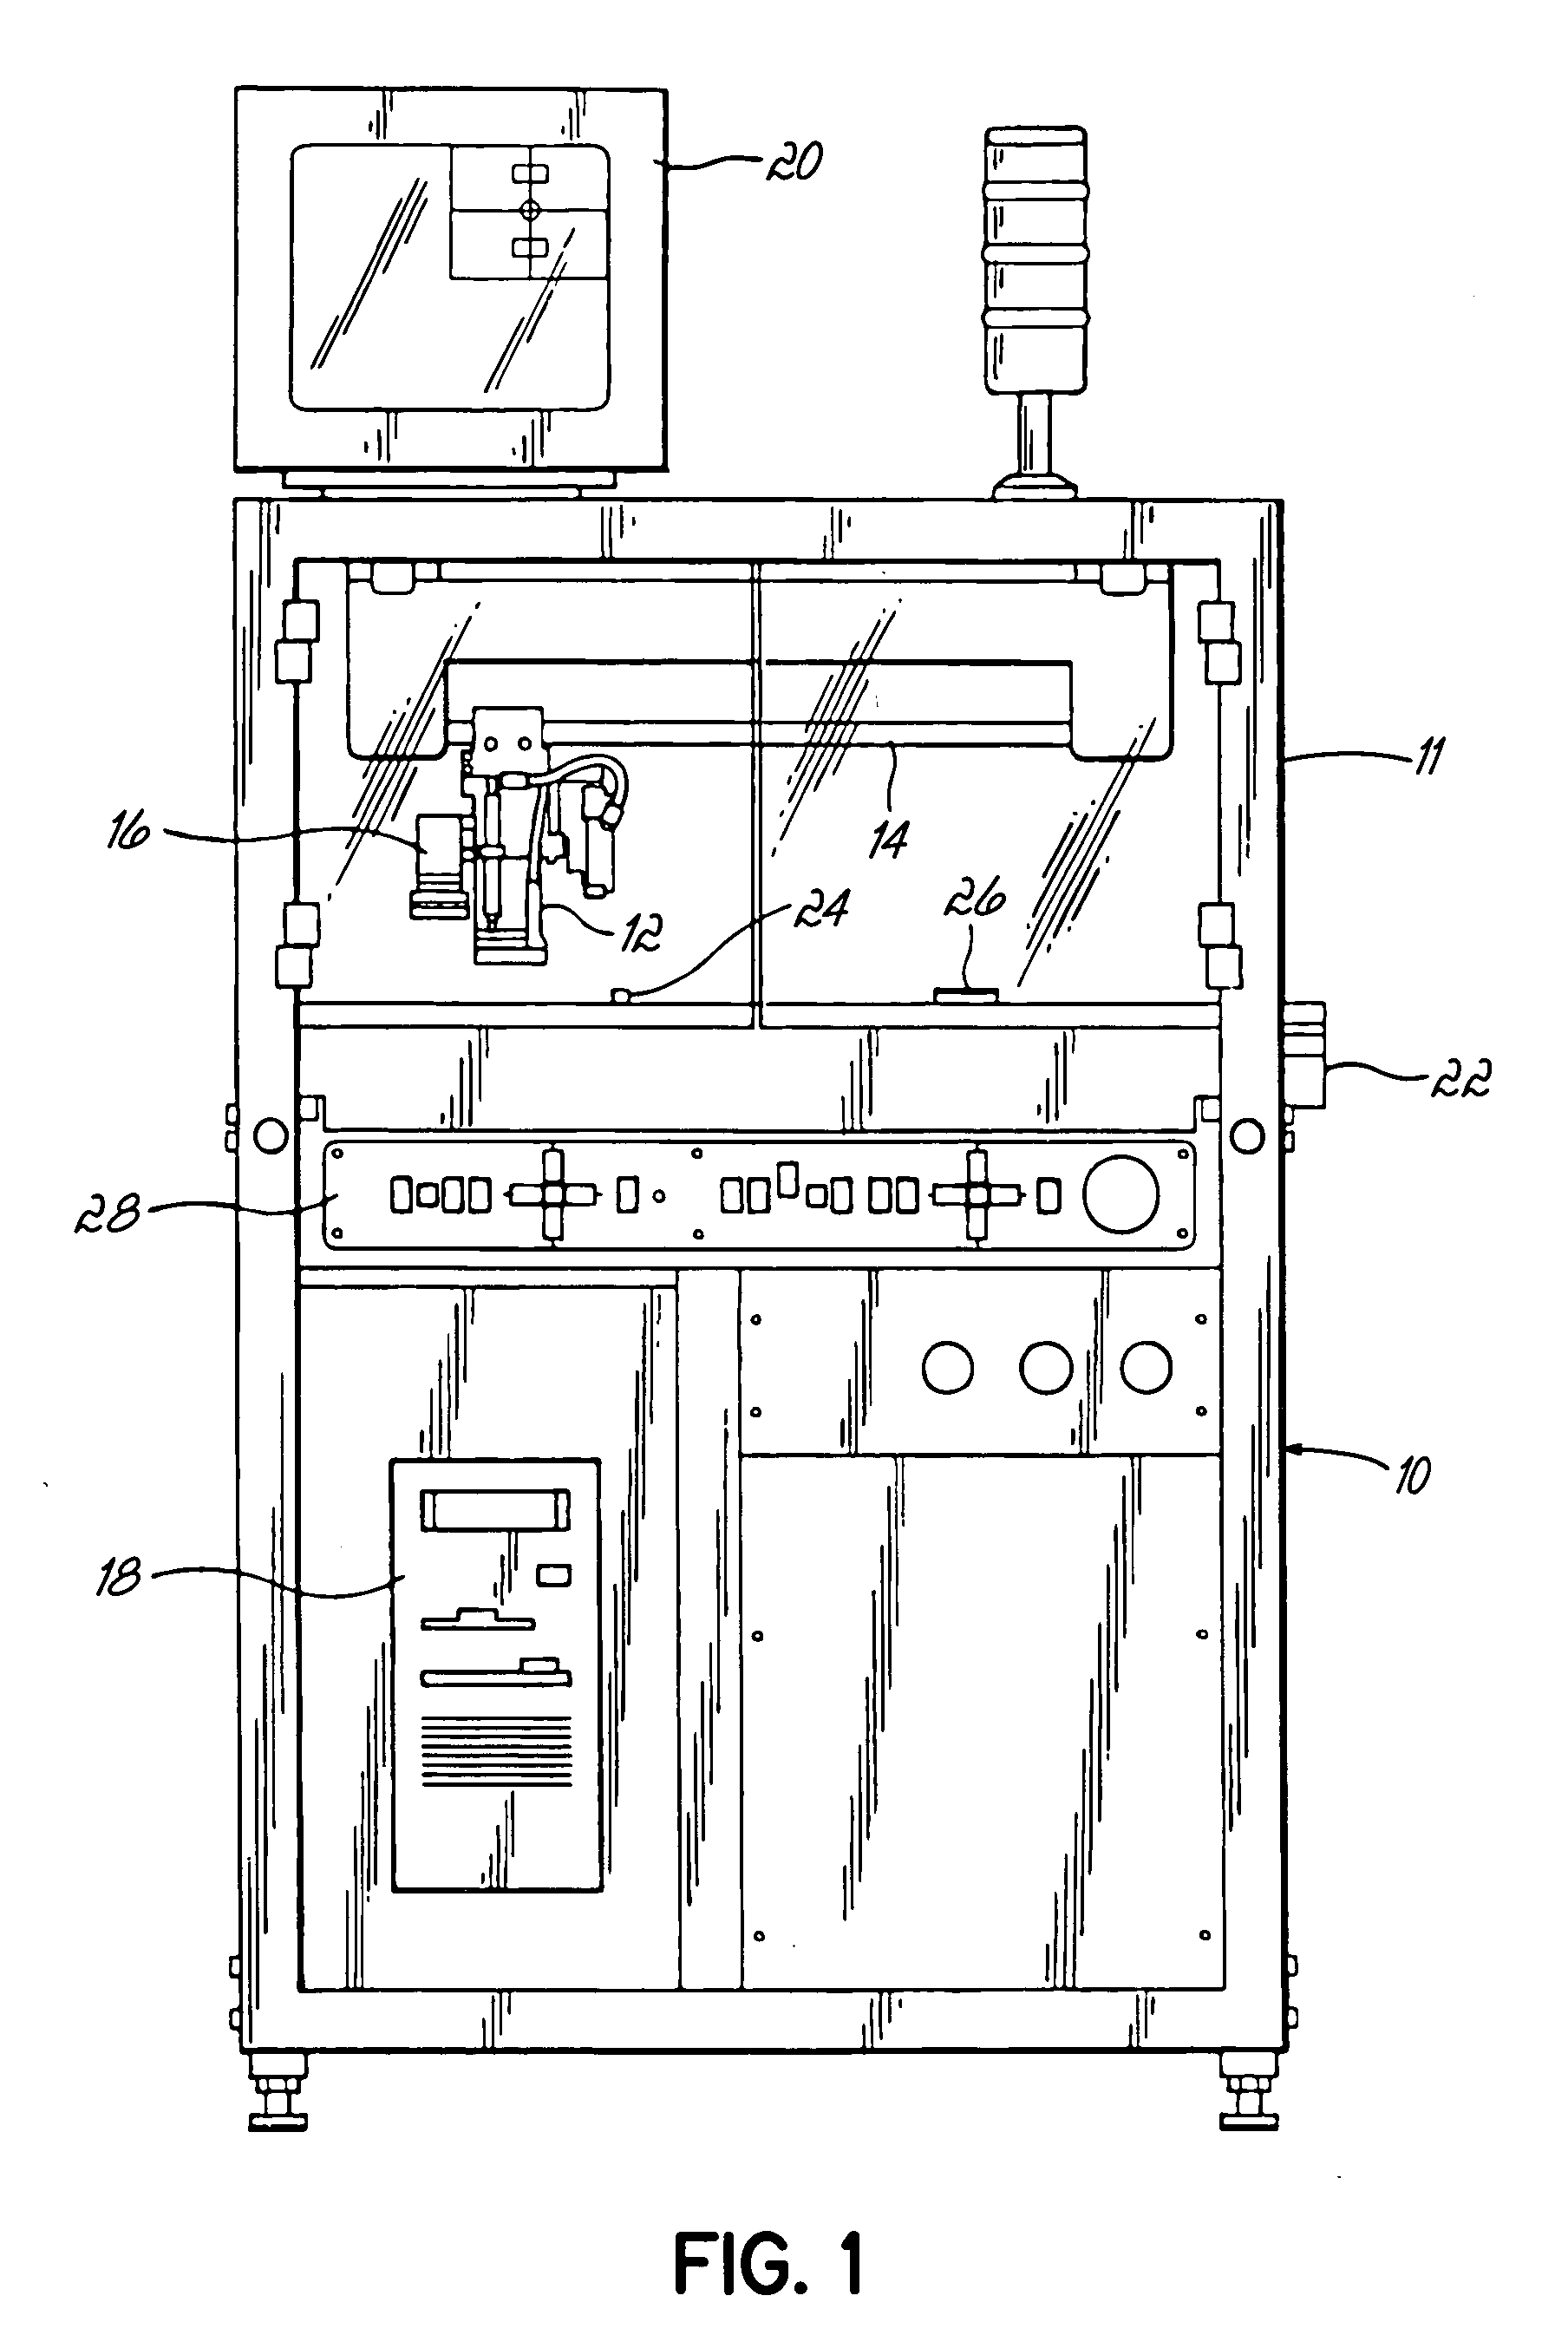 Method of noncontact dispensing of viscous material